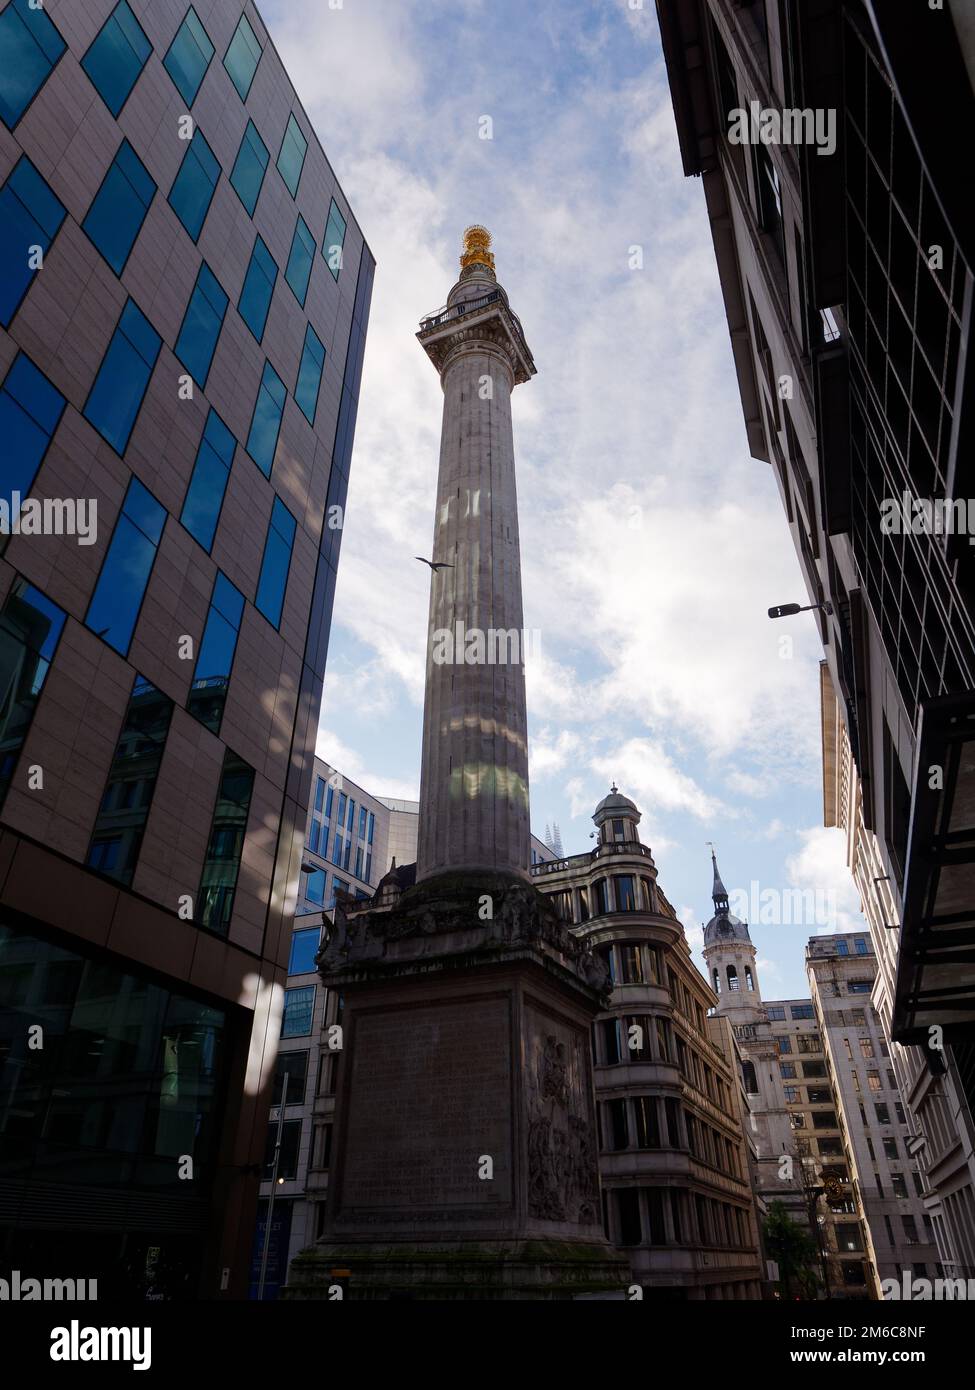 The Monument (To the Great Fire of London) in the City of London with surrounding architecture. Stock Photo